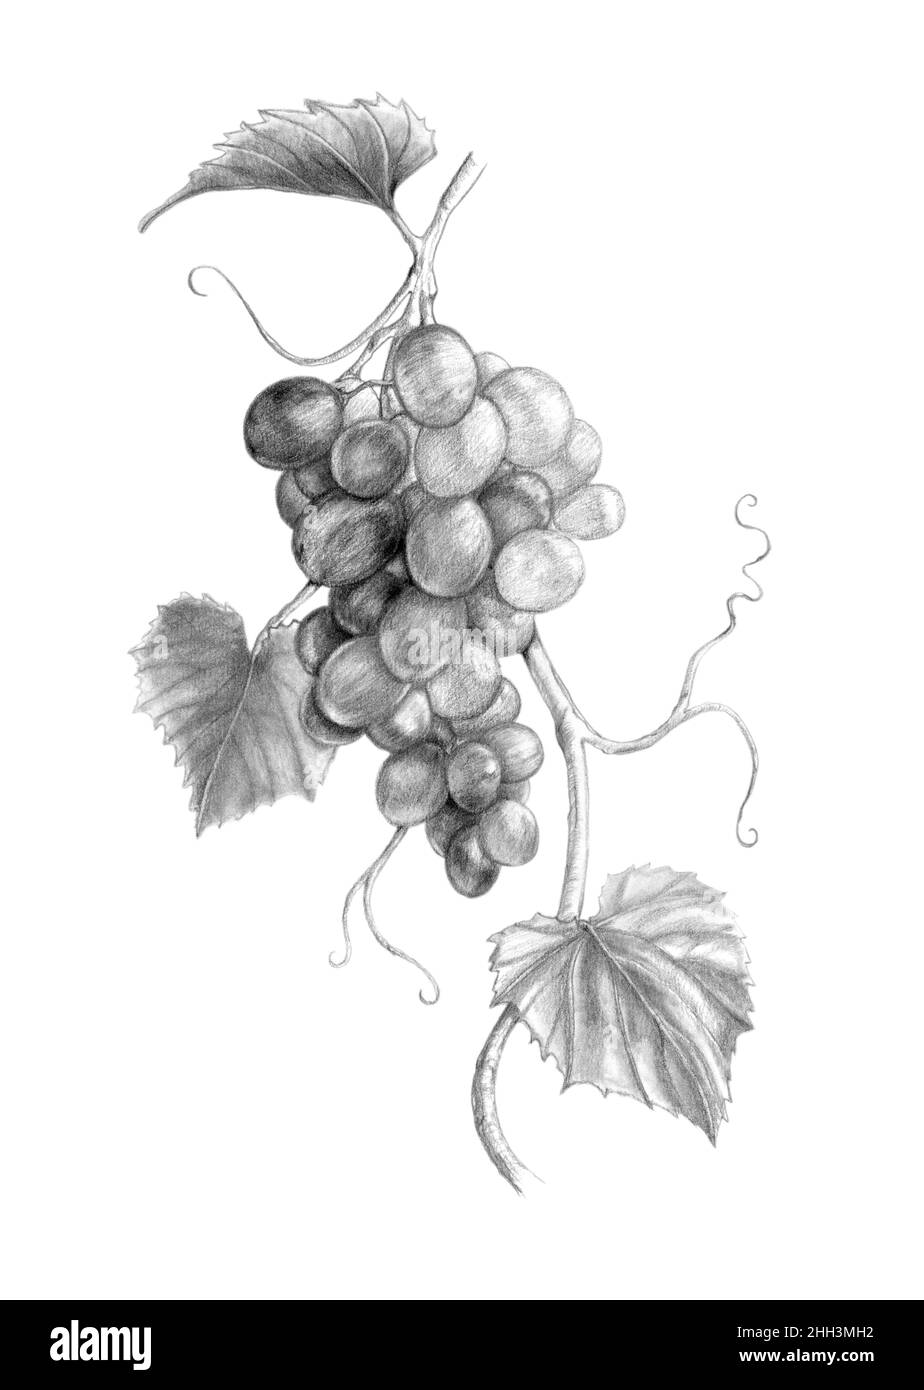 Grapevine branch with grapes and leaves. Traditional graphite illustration on paper. Stock Photo